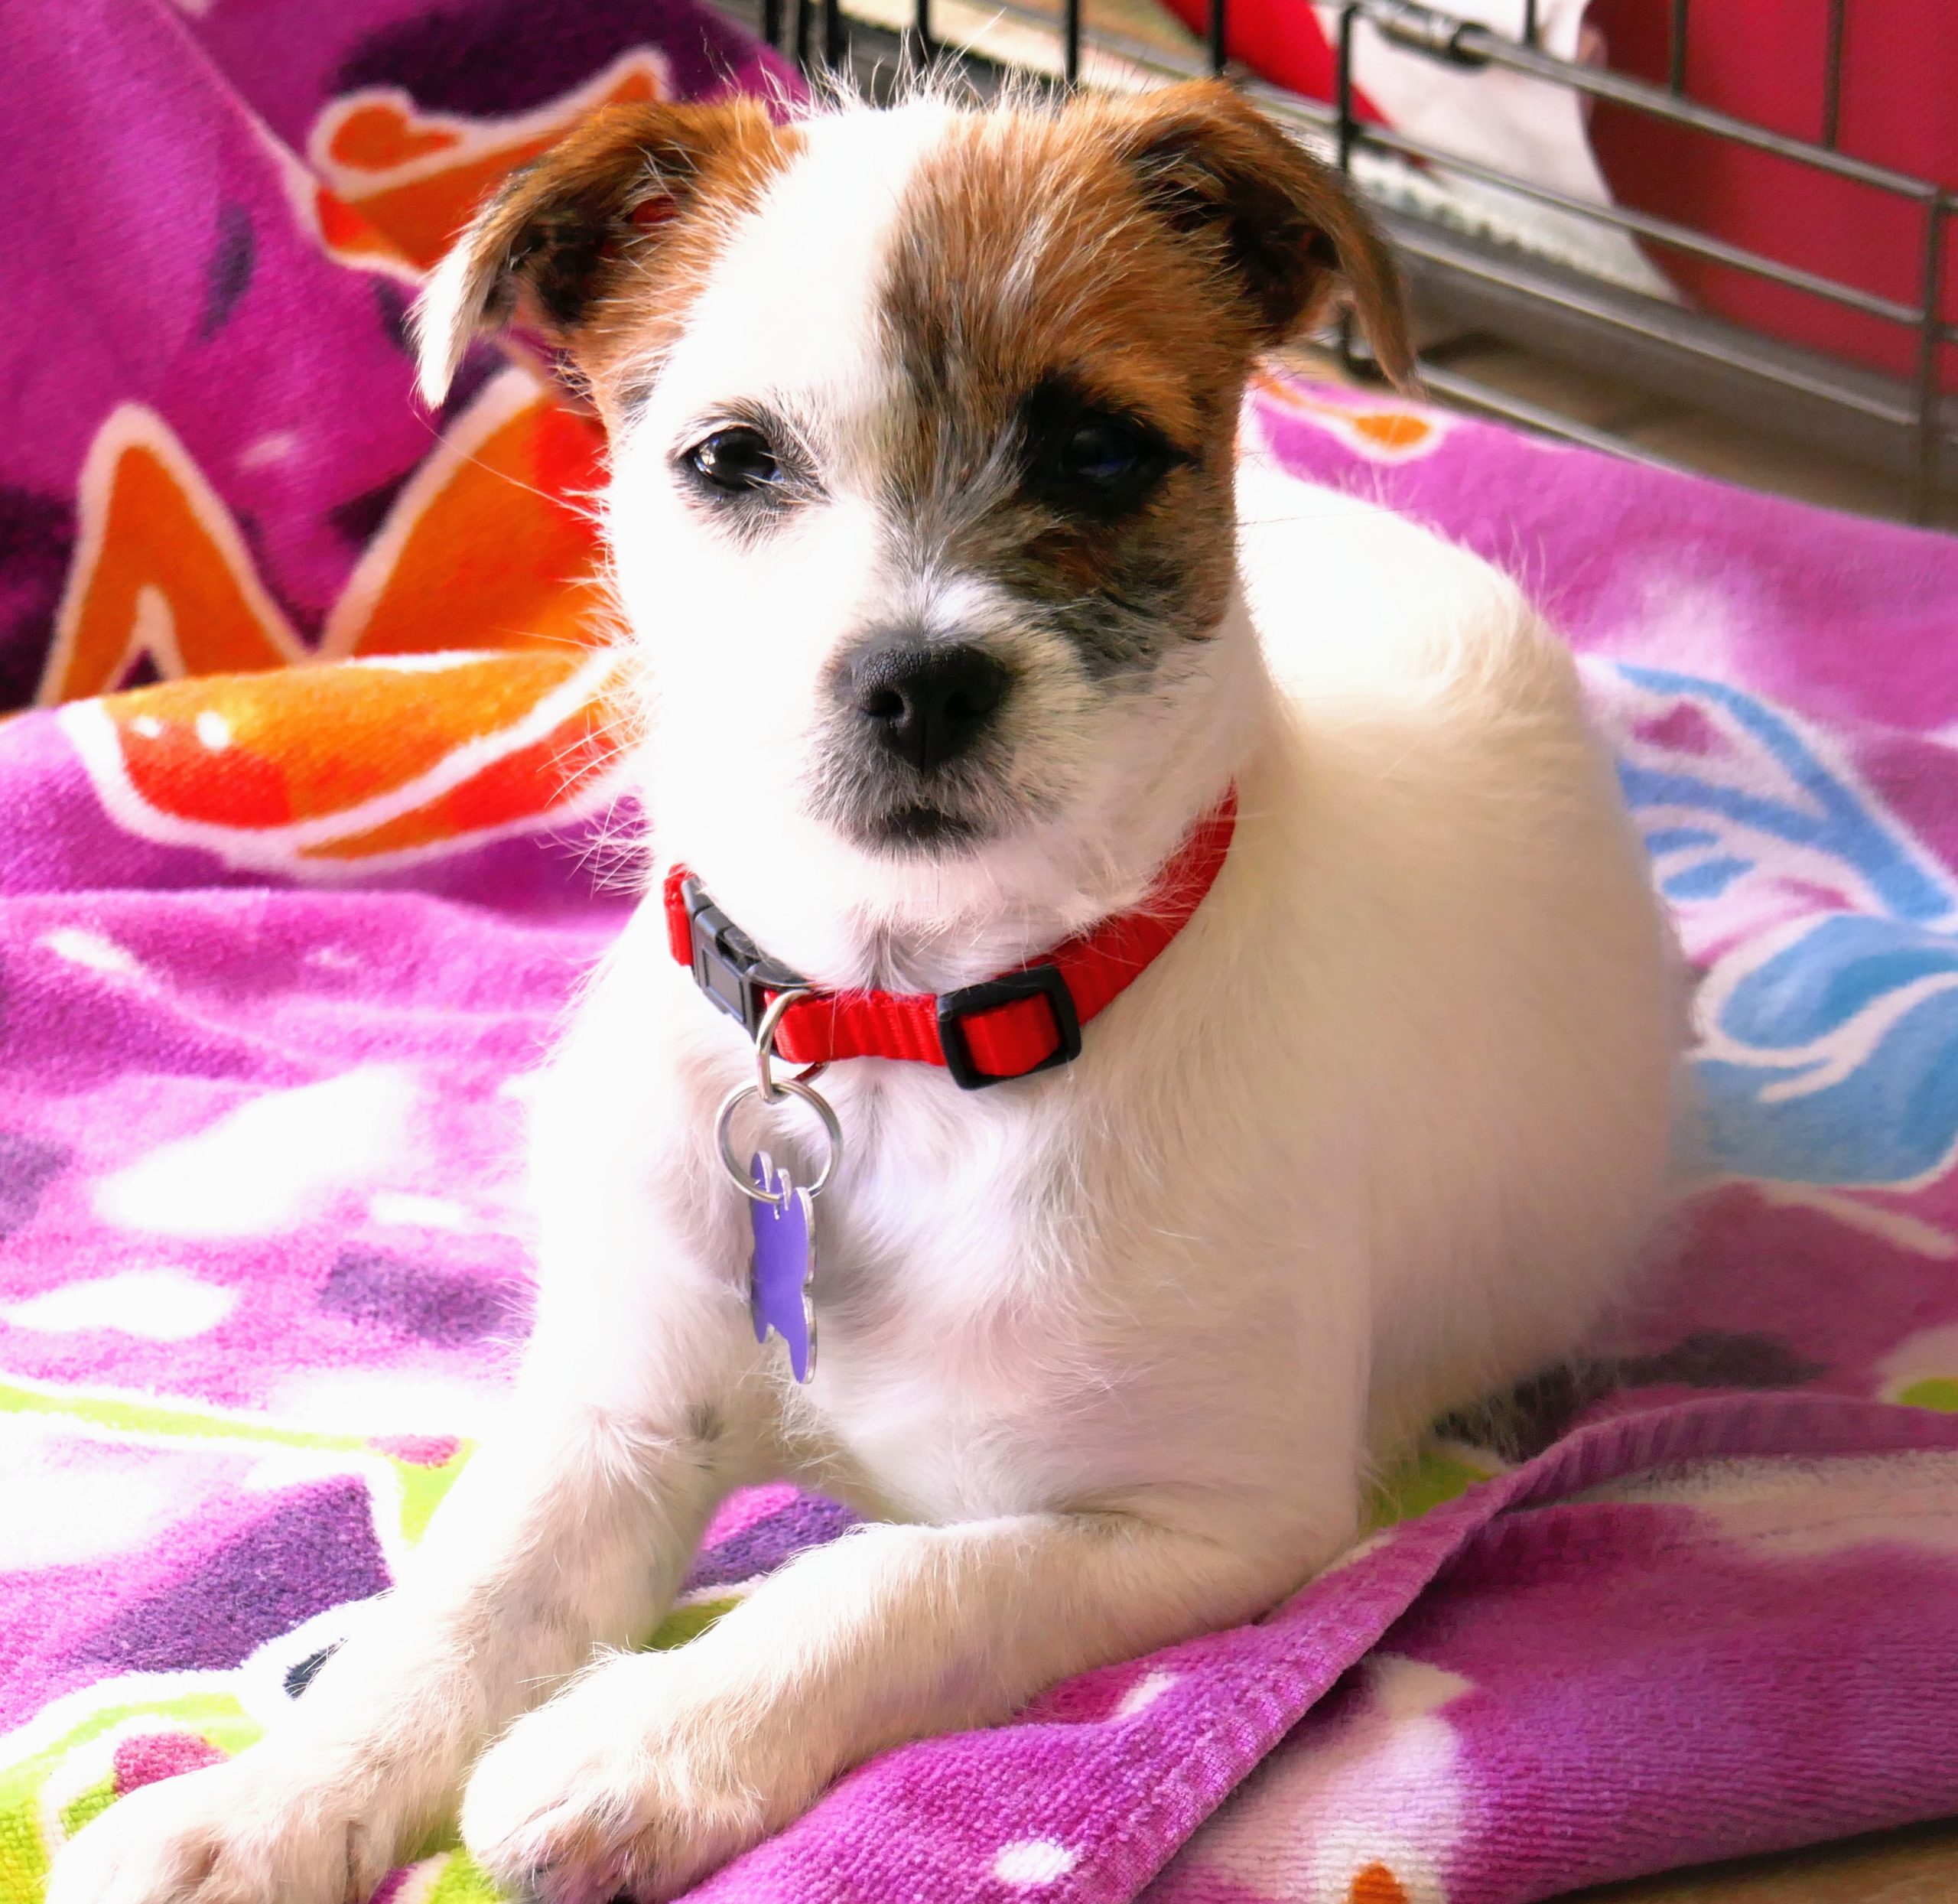 a jack russell terrier puppy sitting on a pink towel and looking sedately at the camera